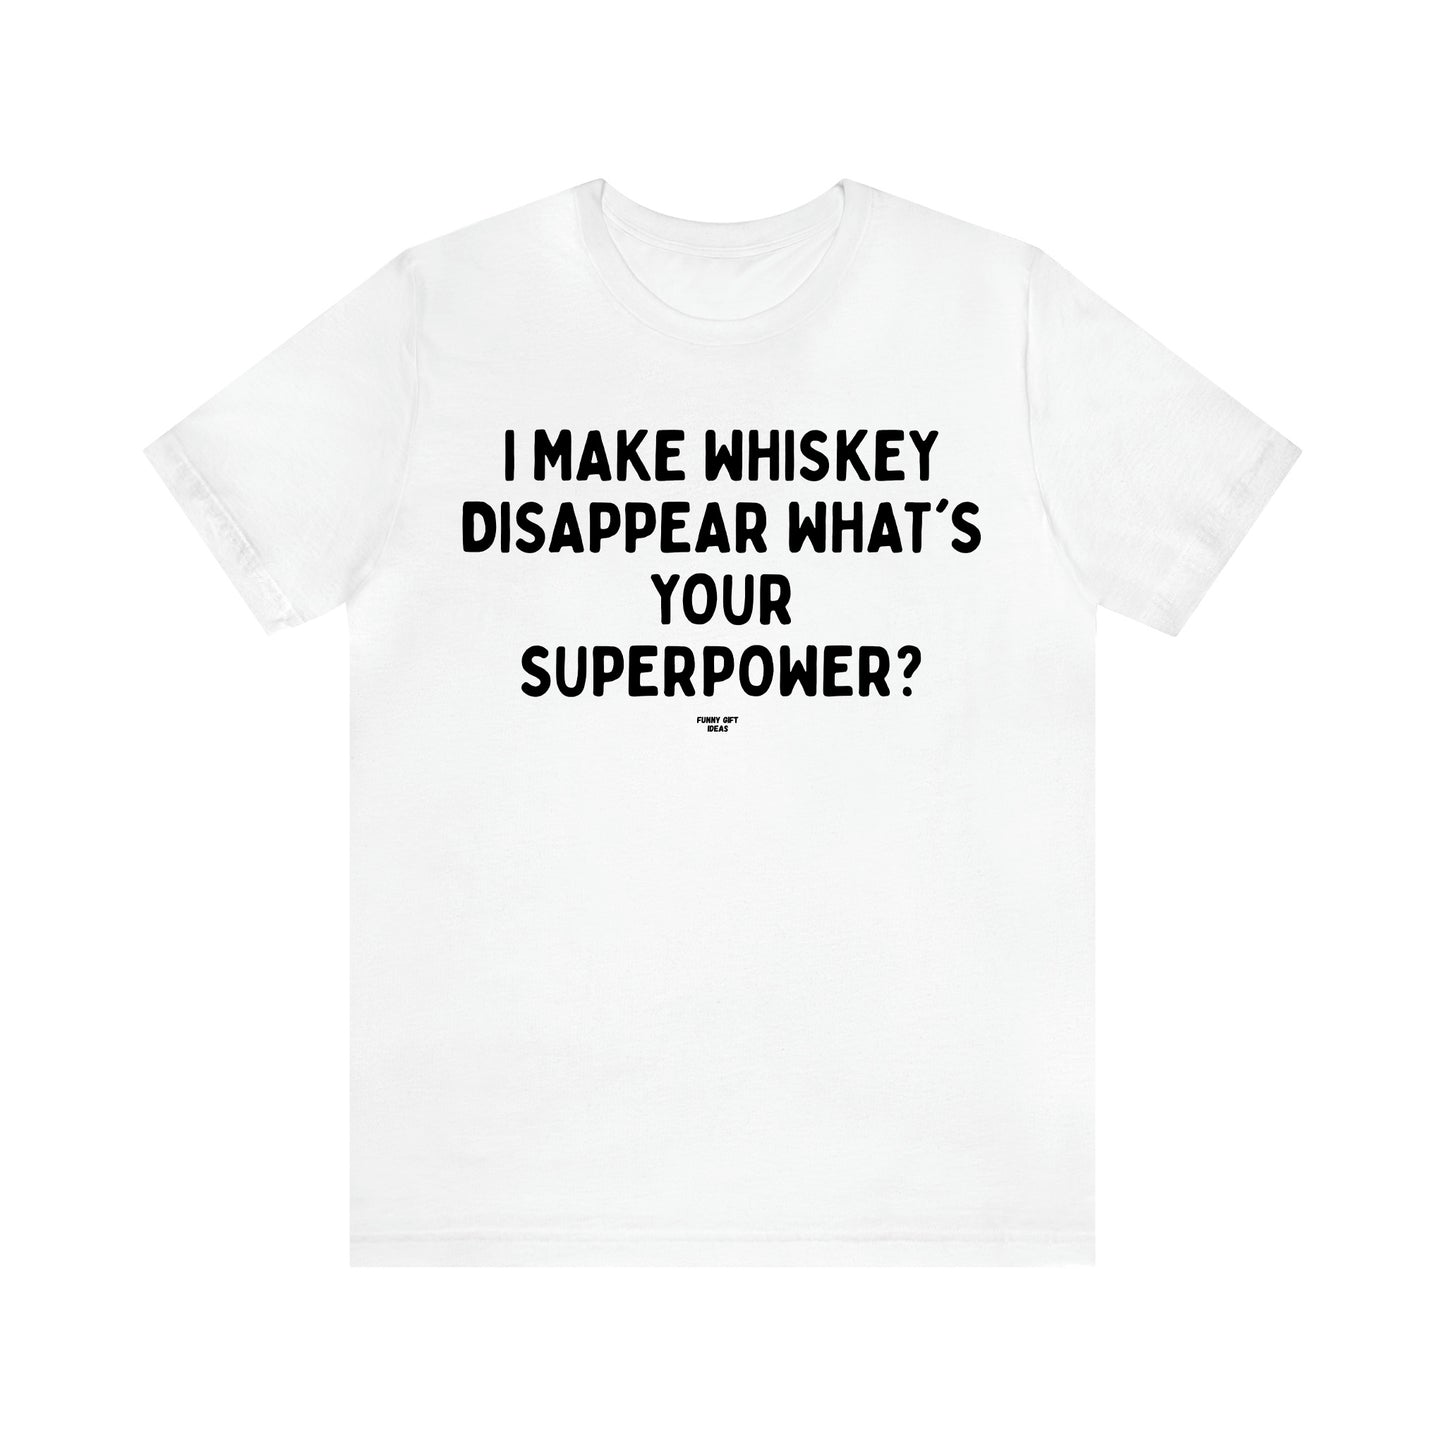 Men's T Shirts I Make Whiskey Disappear What's Your Superpower? - Funny Gift Ideas